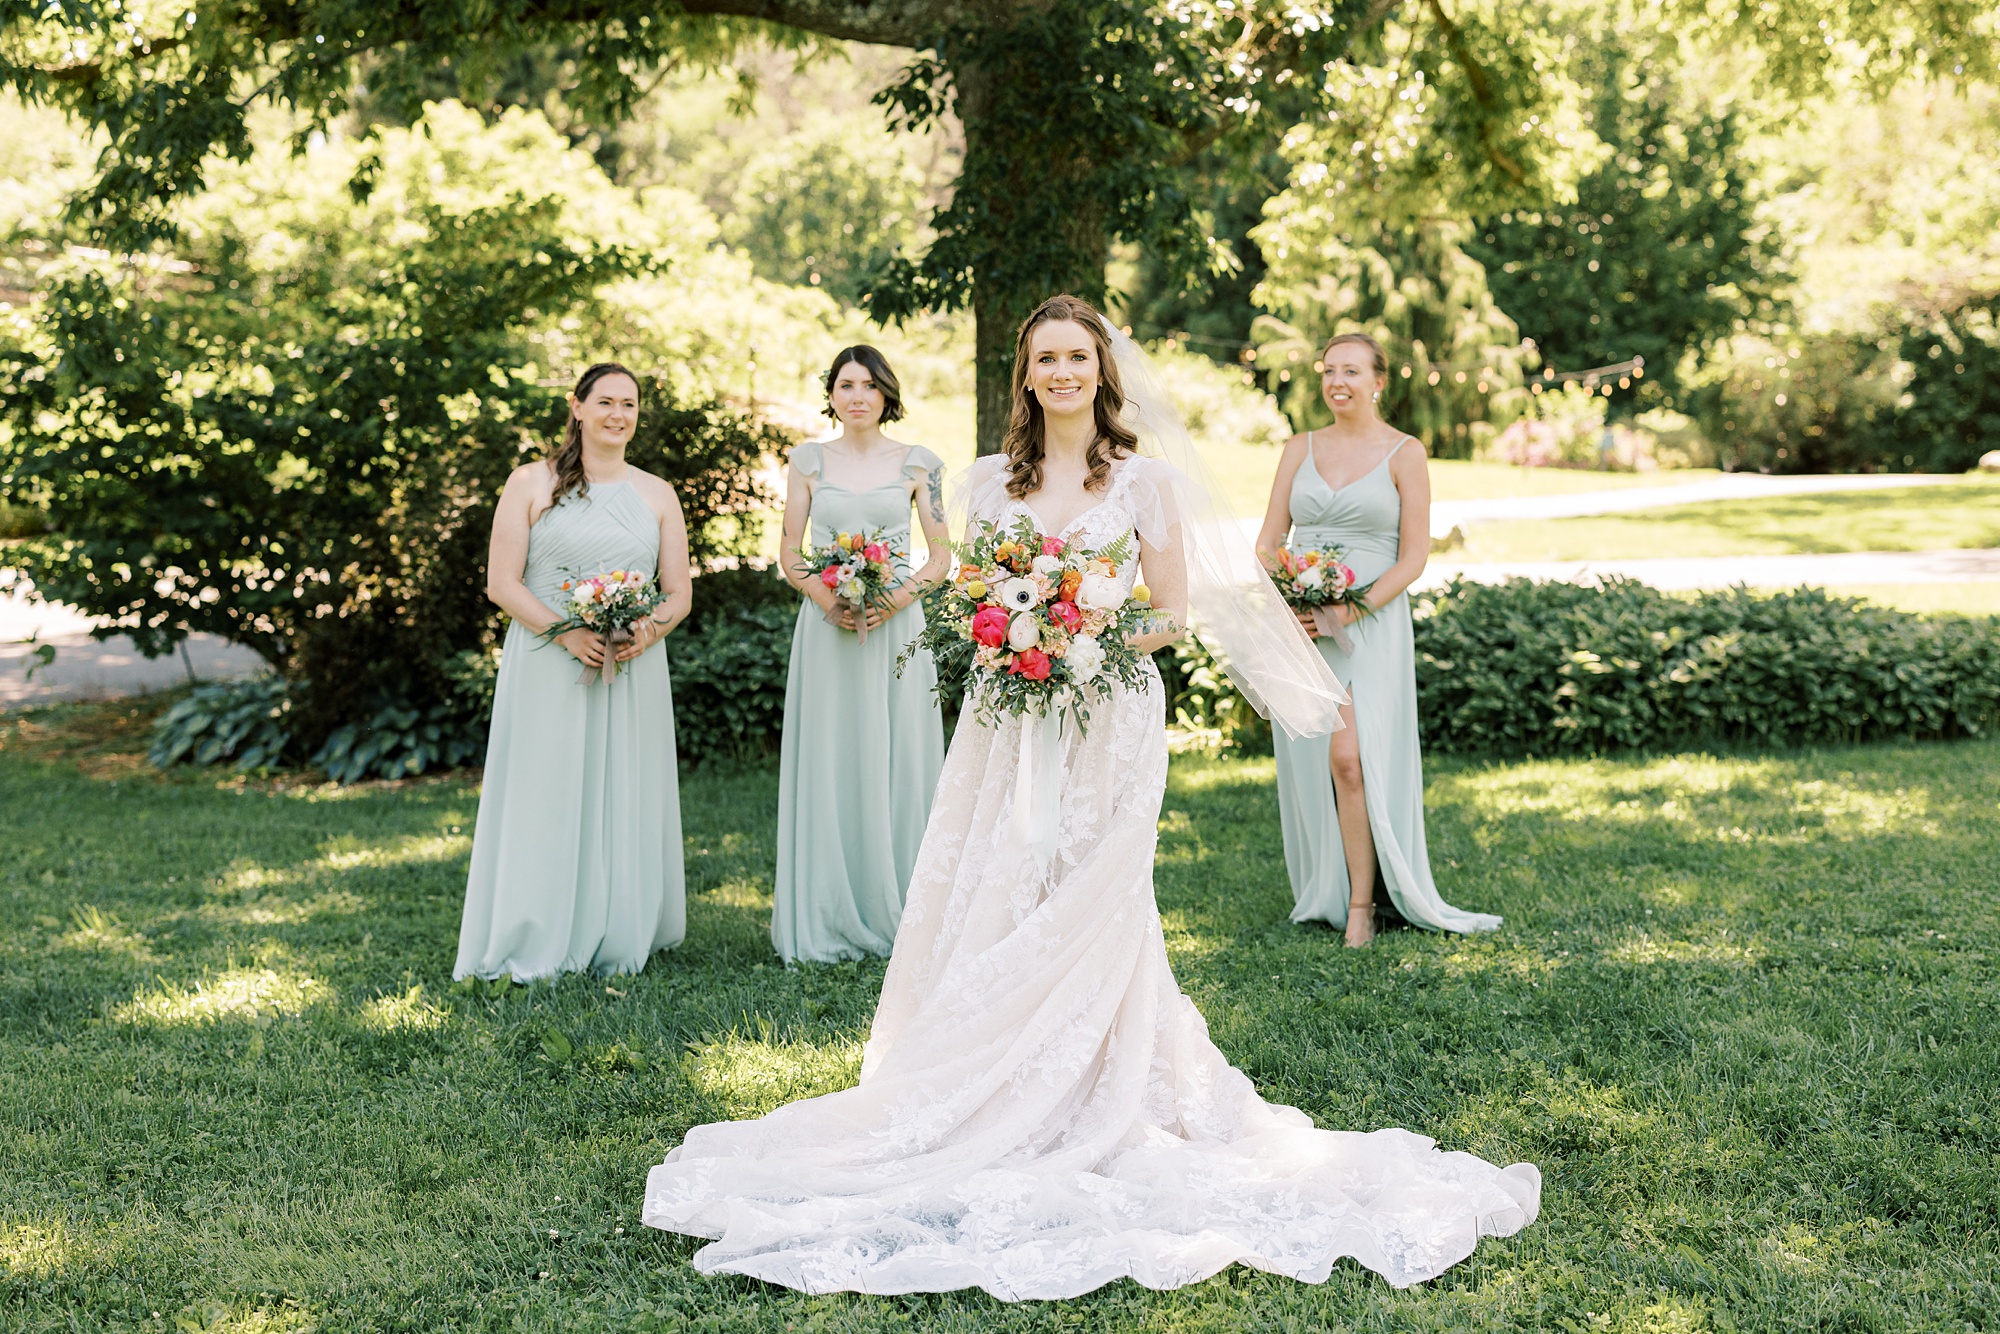 bride stands in wedding gown with lace cap sleeves in front of bridesmaids in mint gowns